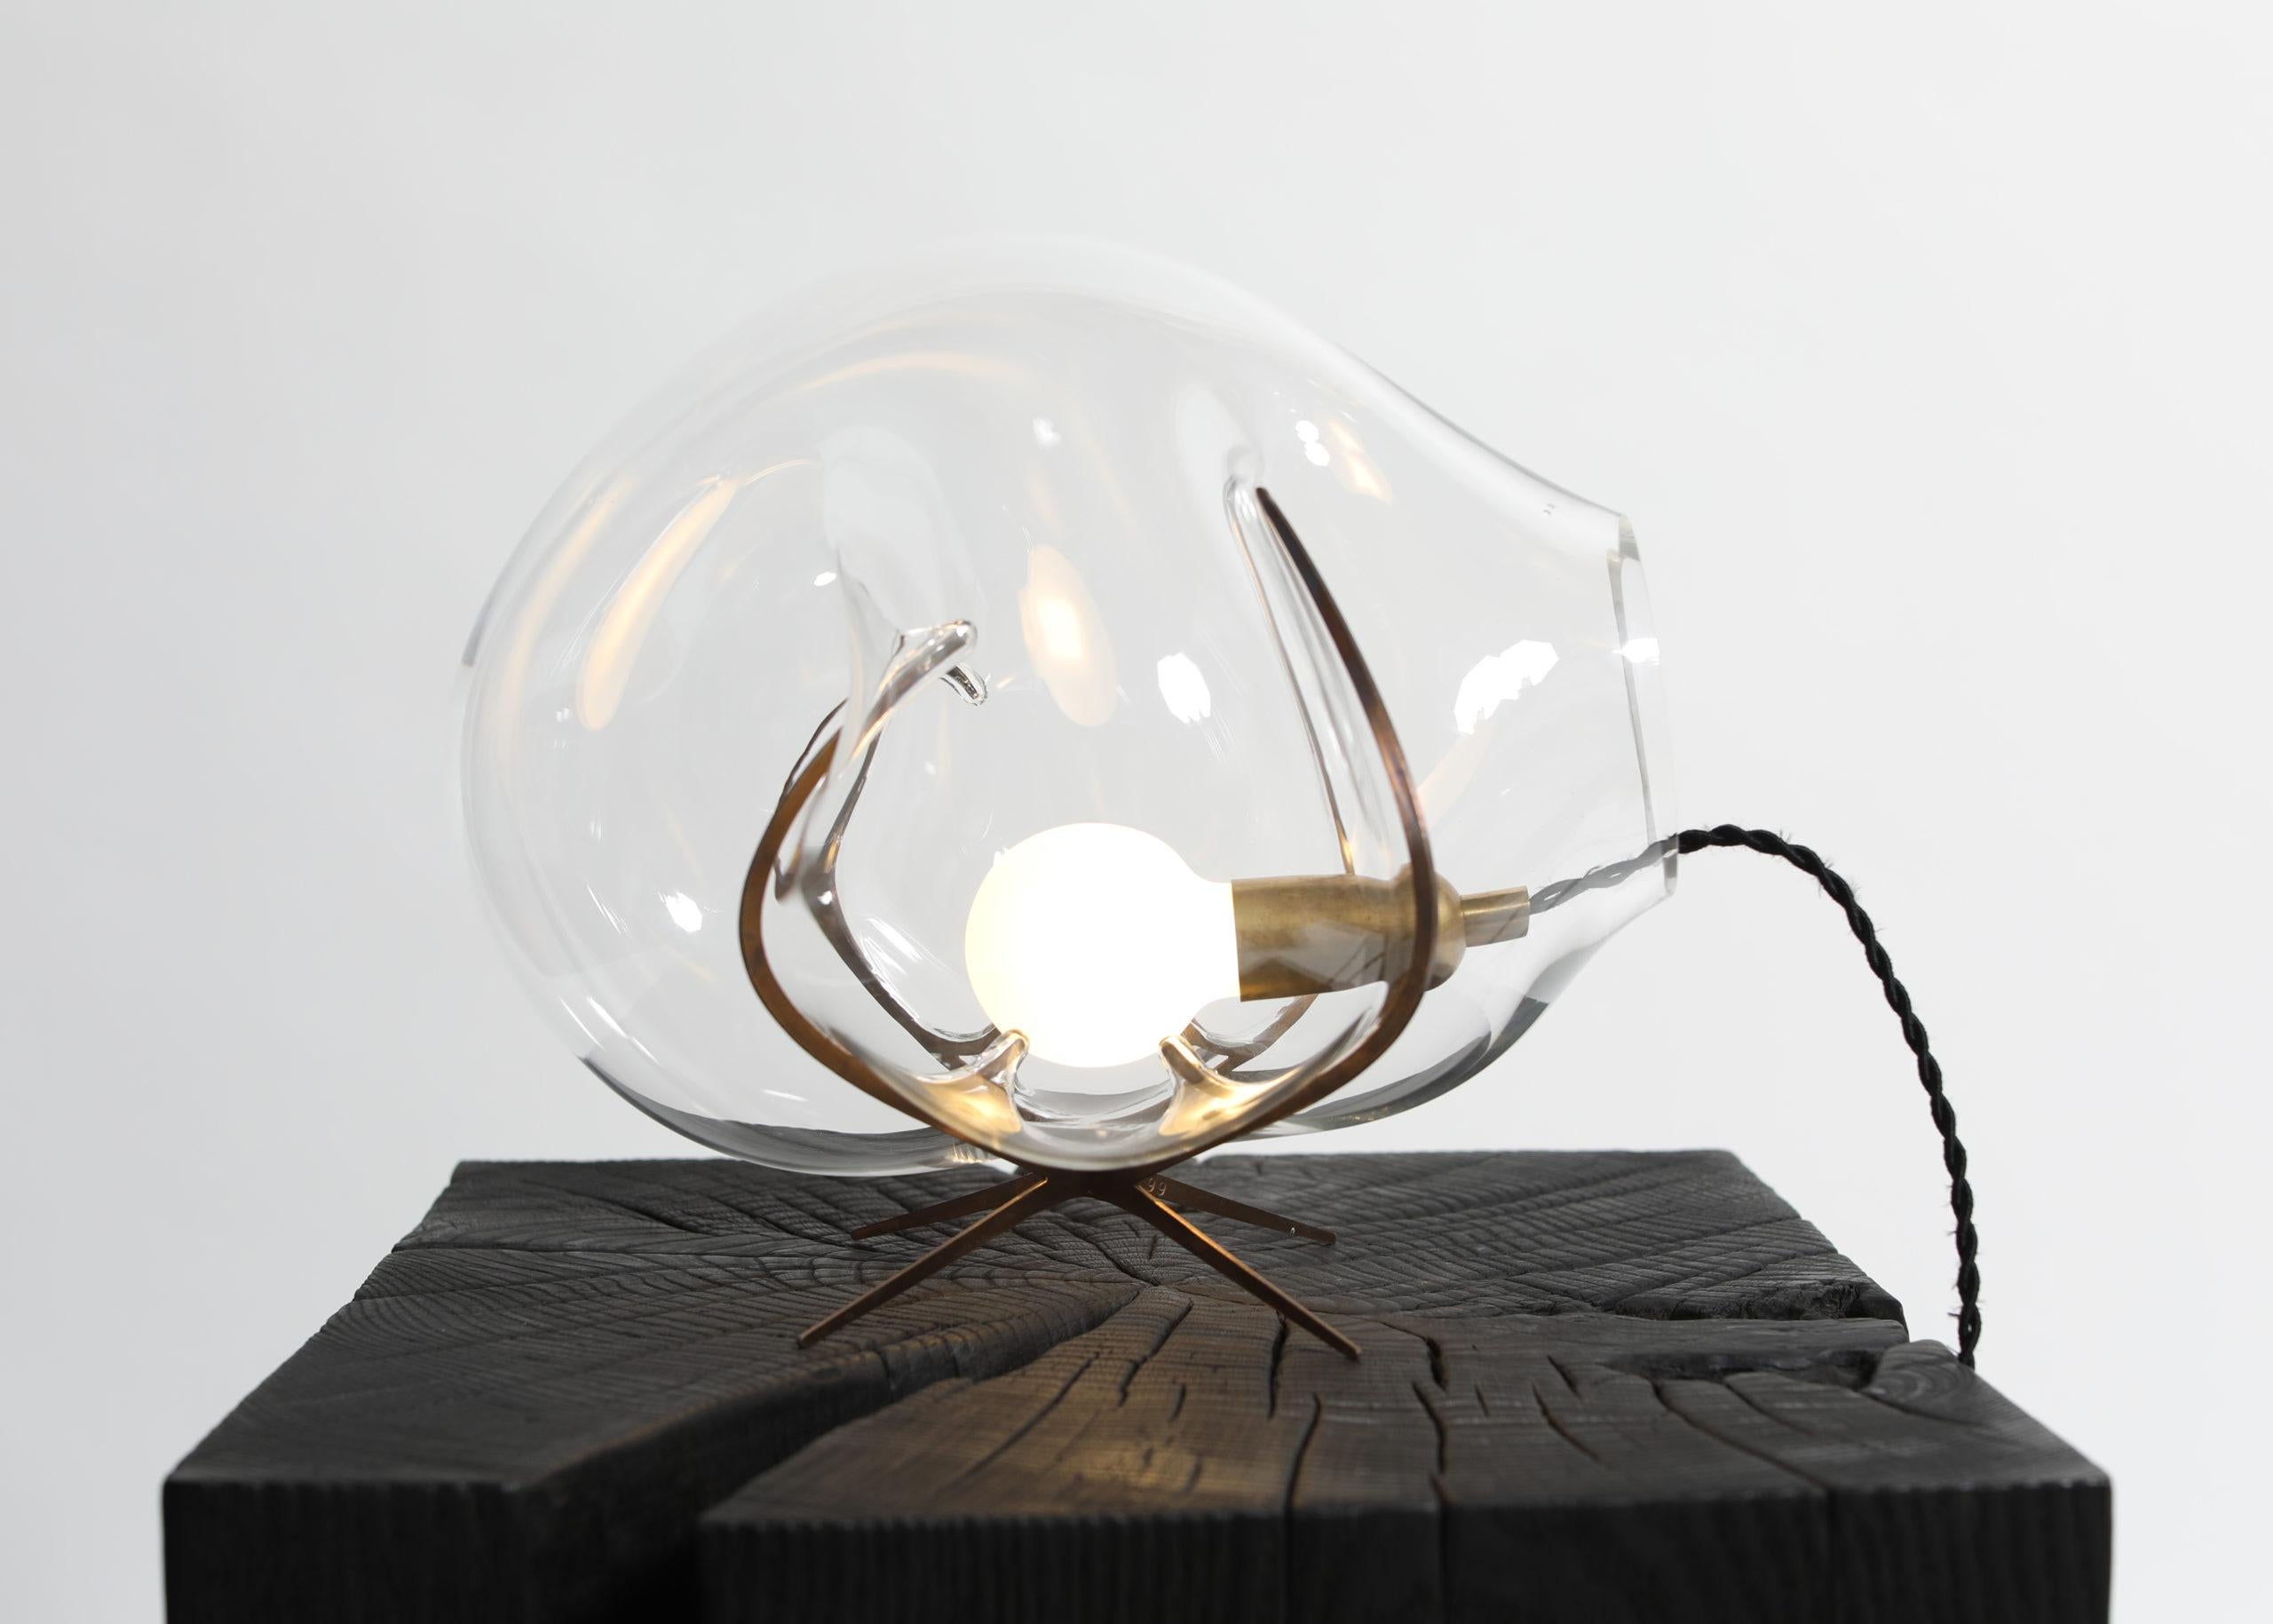 Contemporary glass table light - Exhale by Catie Newell / Wes McGee for WDSTCK

Design: Catie Newell / Wes McGee
Material: Crystal glass / stainless steel

Dimensions: Diameter 30 cm

Handcrafted in The Netherlands

Exhale skillfully